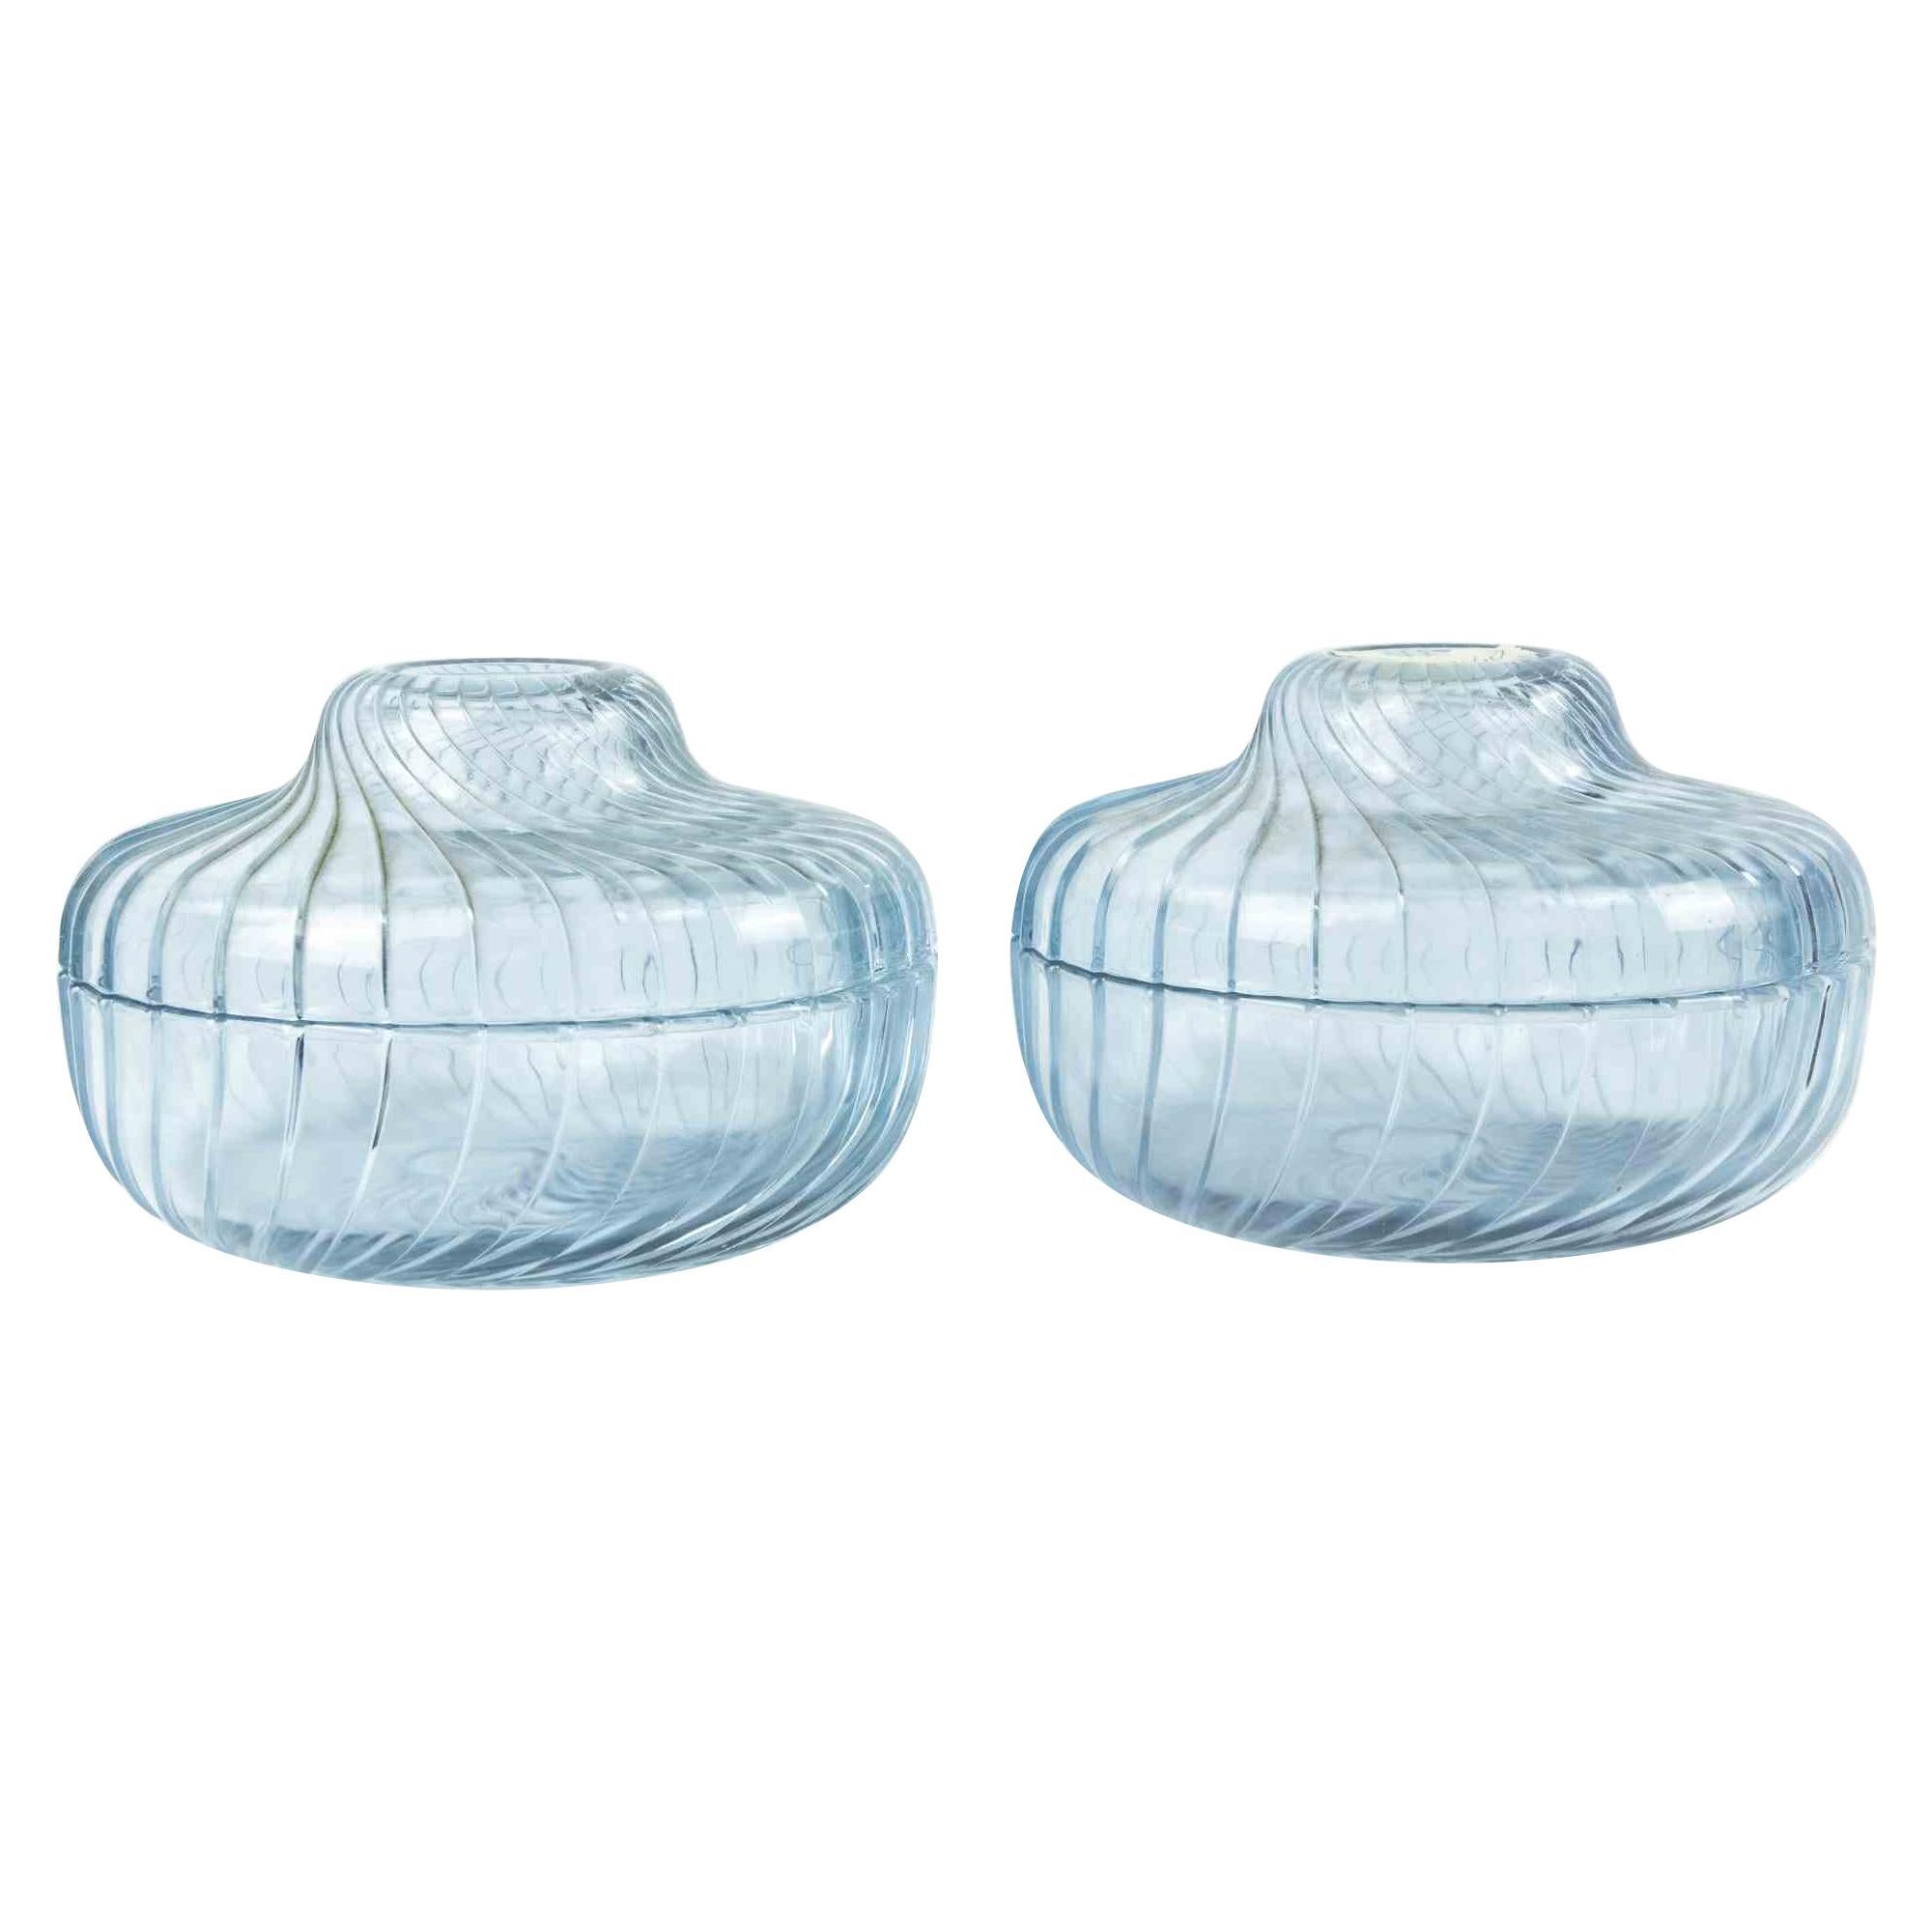 Pair of Vintage Glass Containers, Italy 1970s